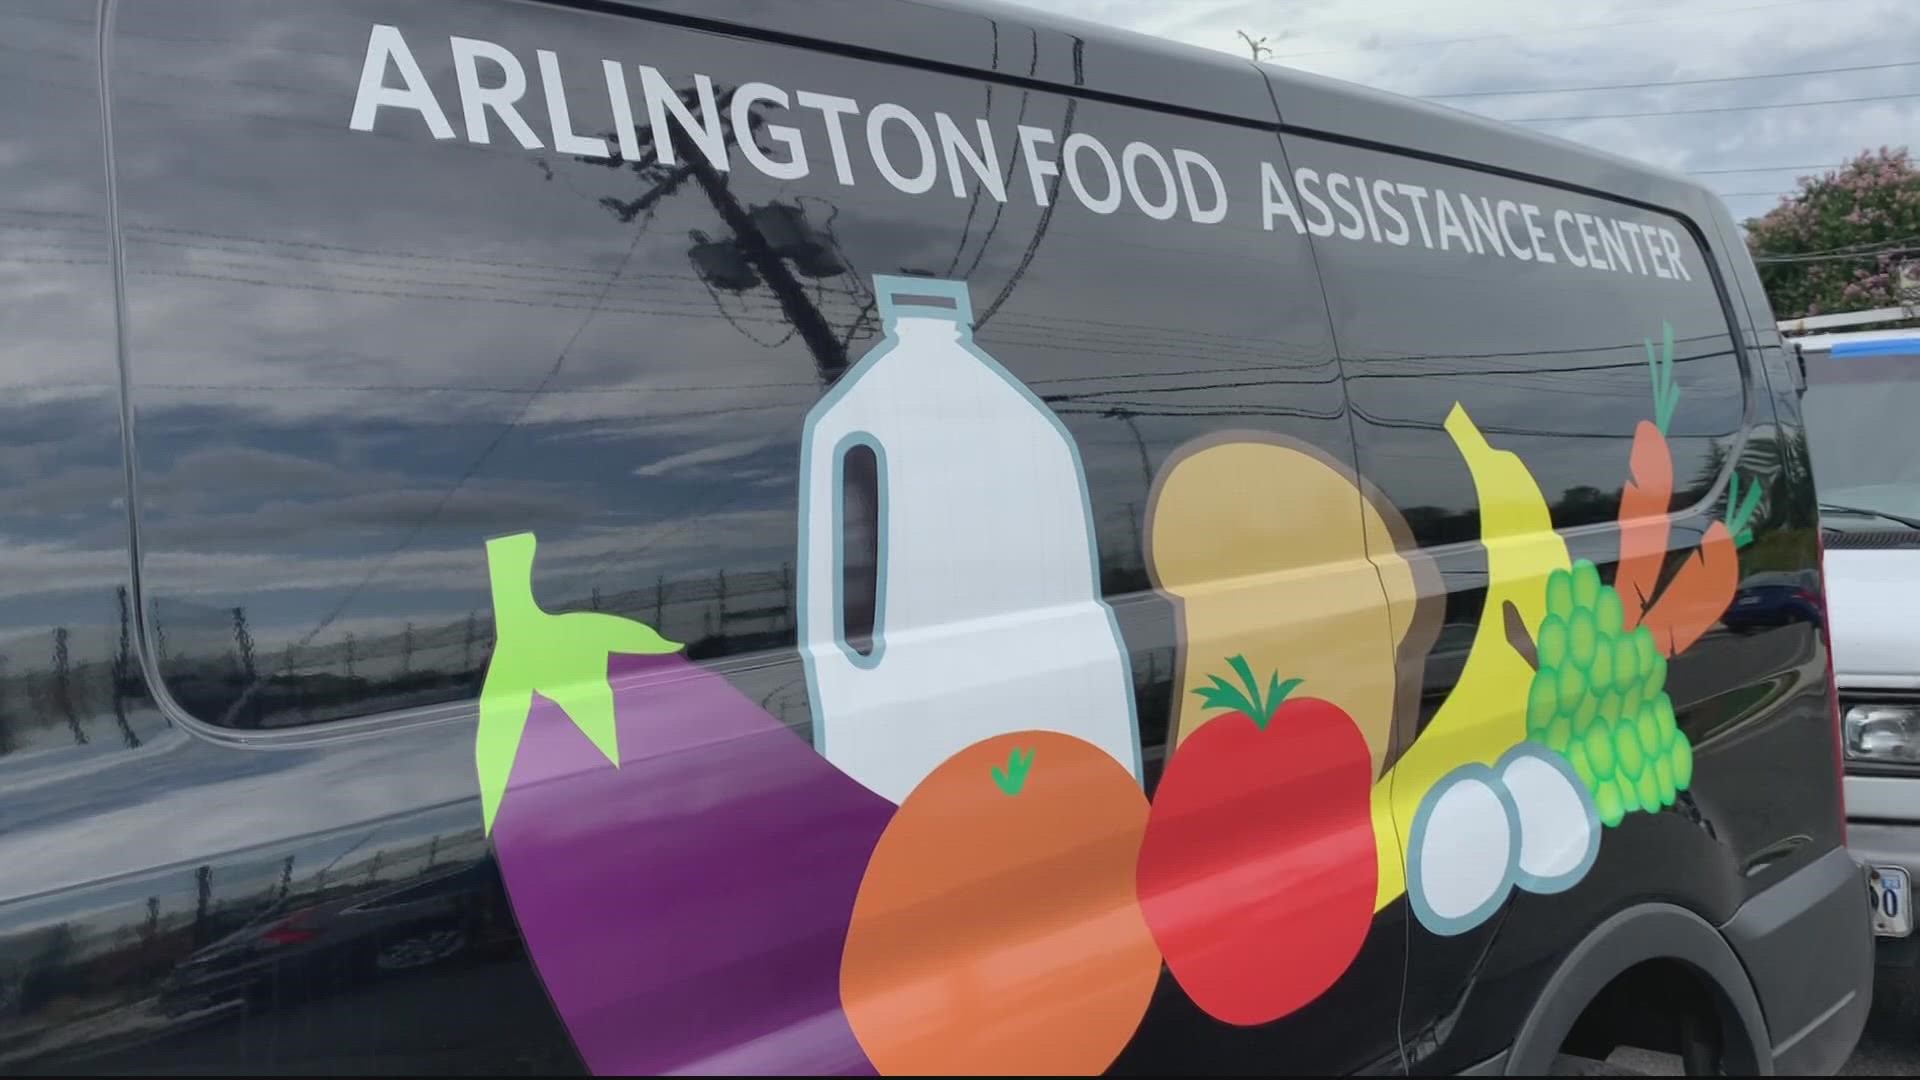 The Arlington Food Assistance Center is the largest food pantry in the county.